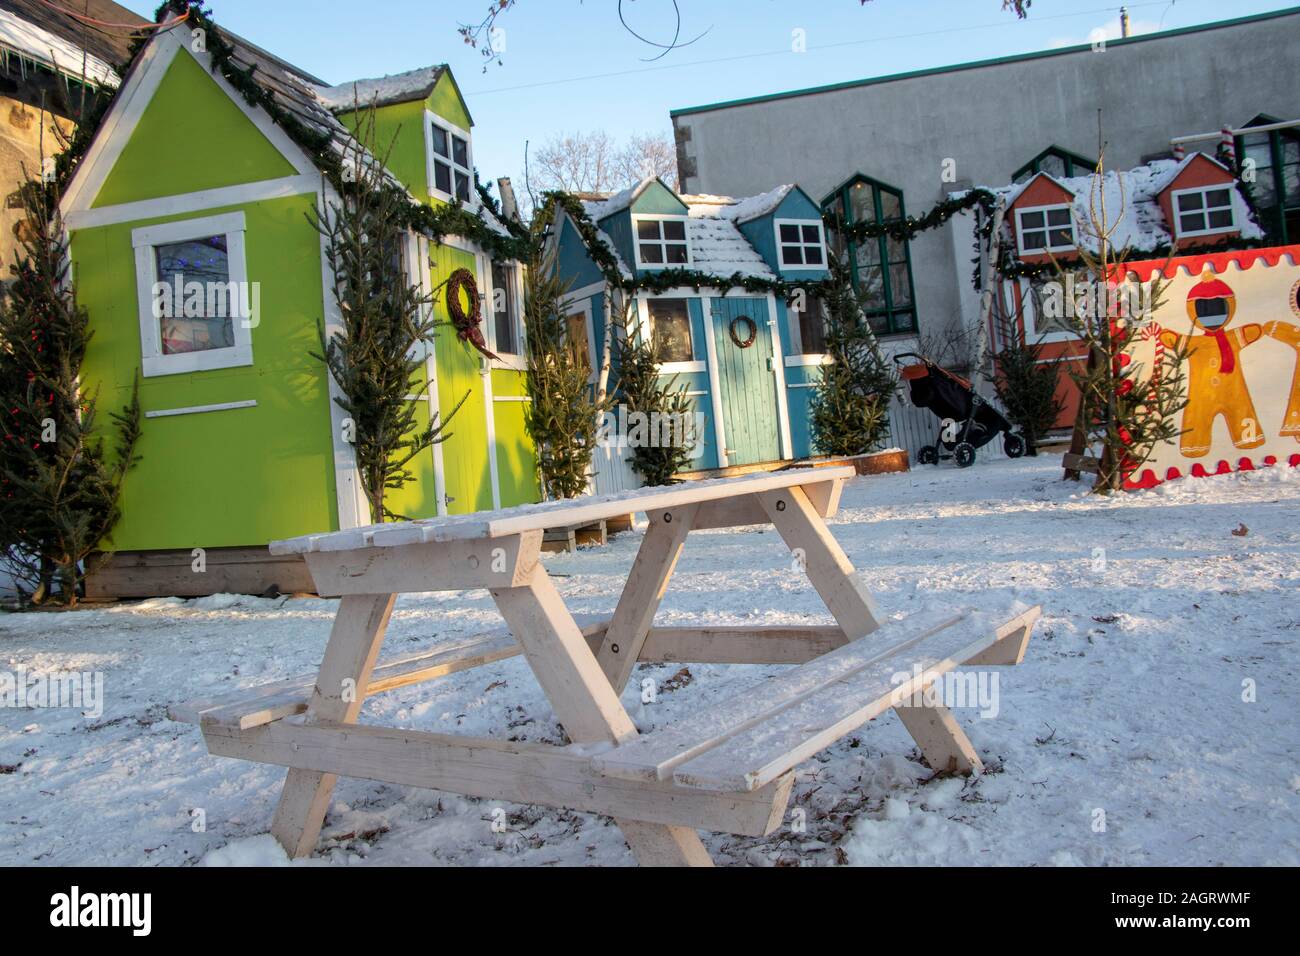 December 7, 2019 - Longueuil, Québec, Canada : Mini Houses and Mini Picnic Table in children area park during Longueuil Chris Stock Photo